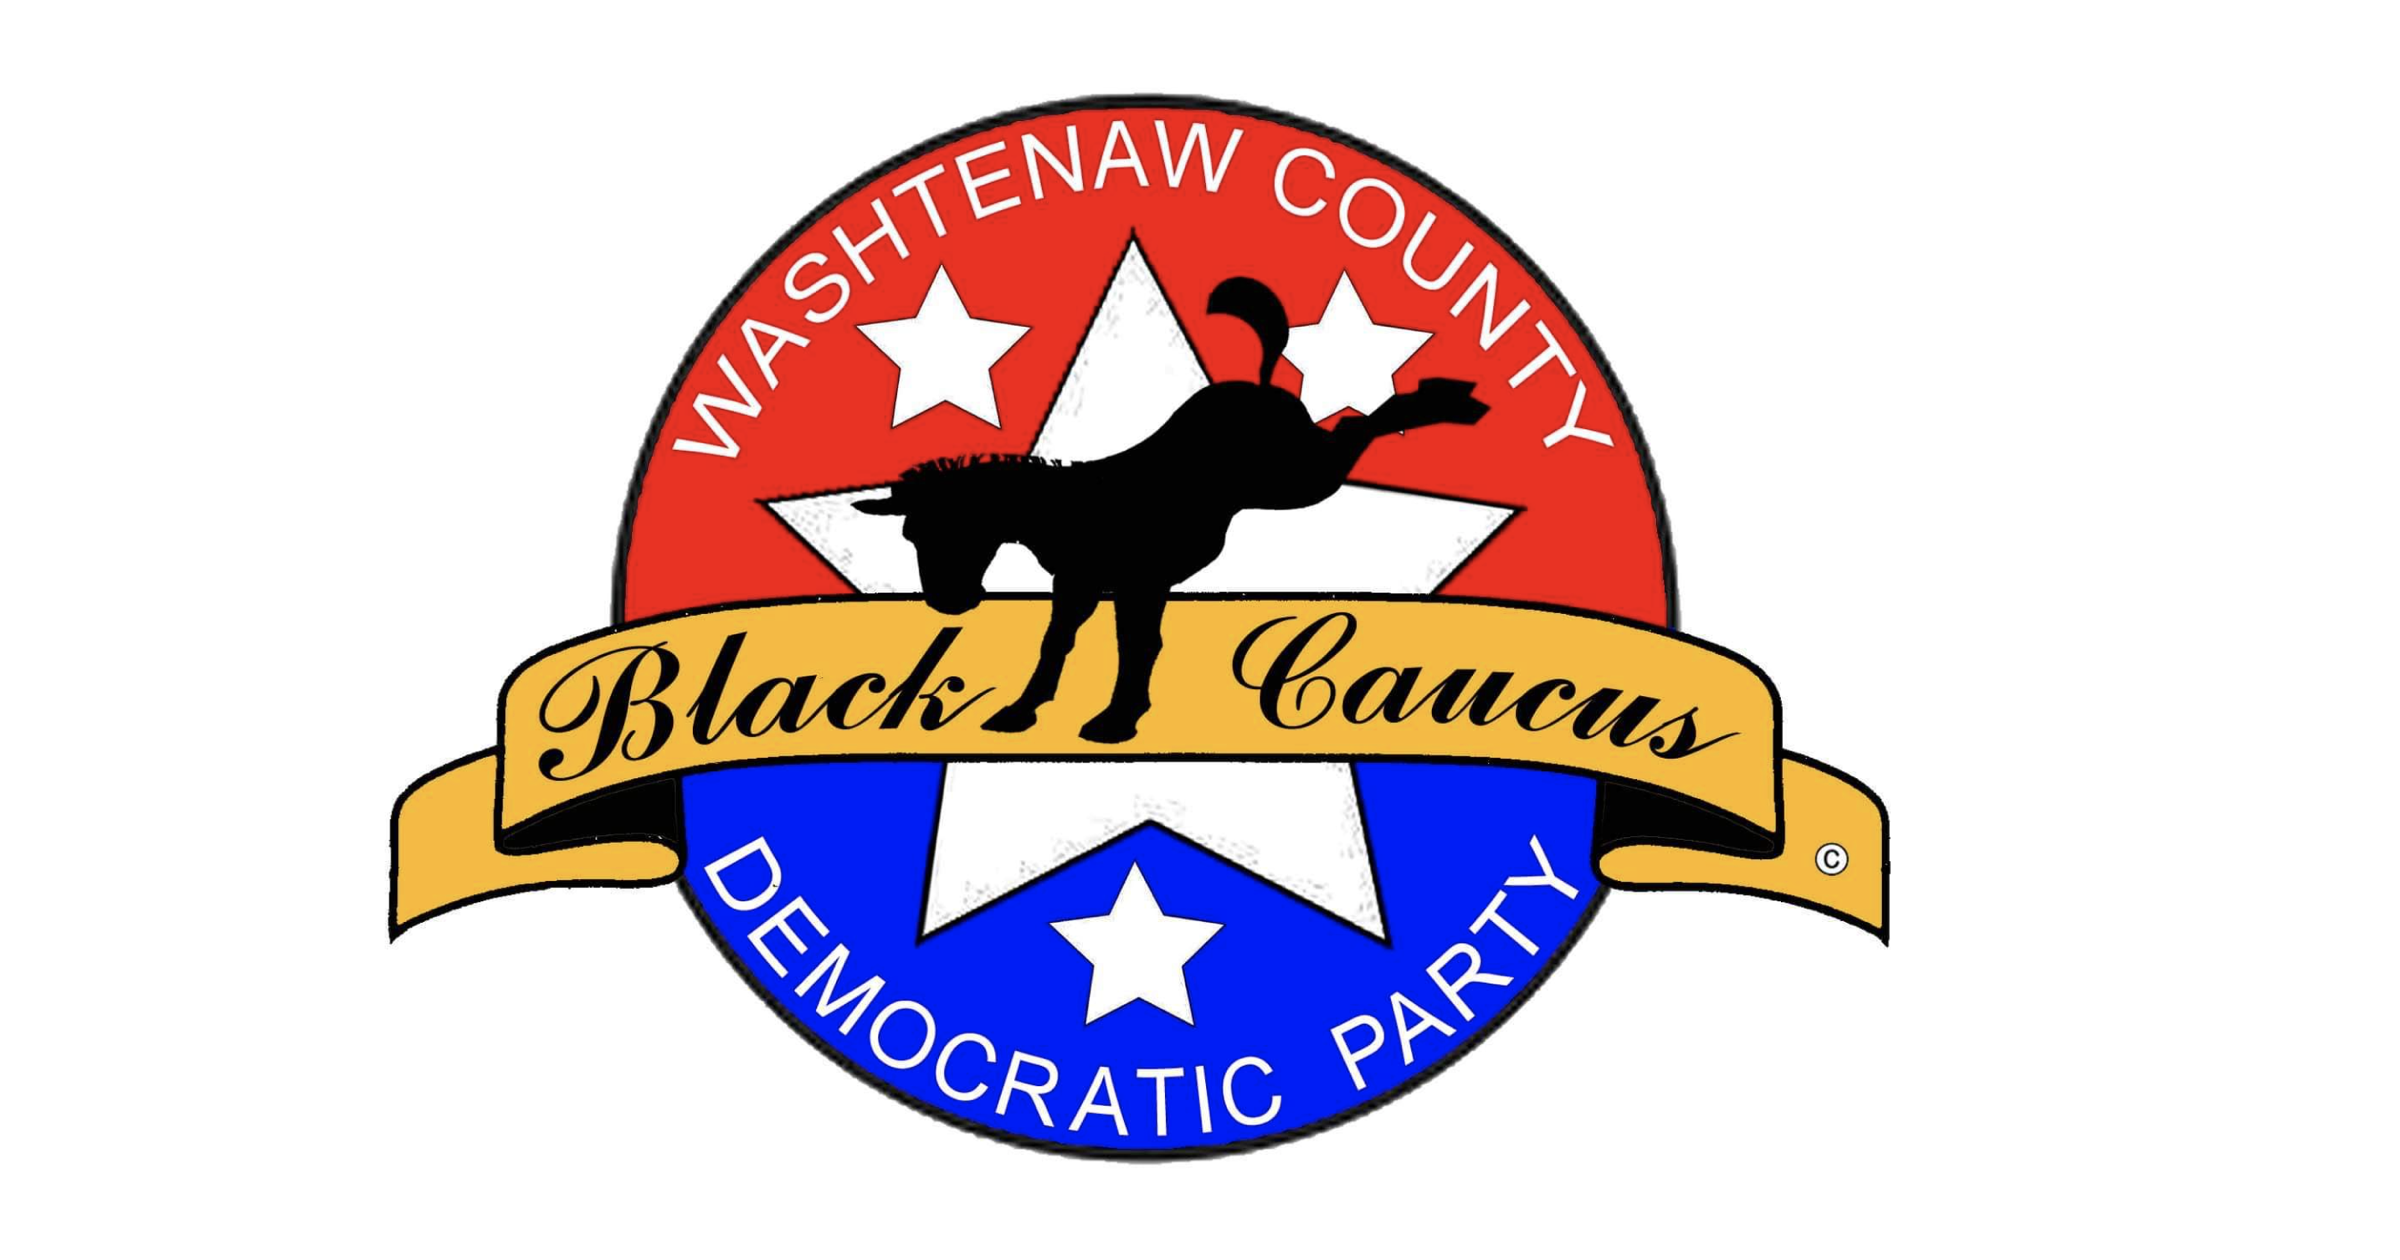 et details and sign up for "WCDP Black Caucus General Meeting" hosted by Washtenaw County Democratic Party